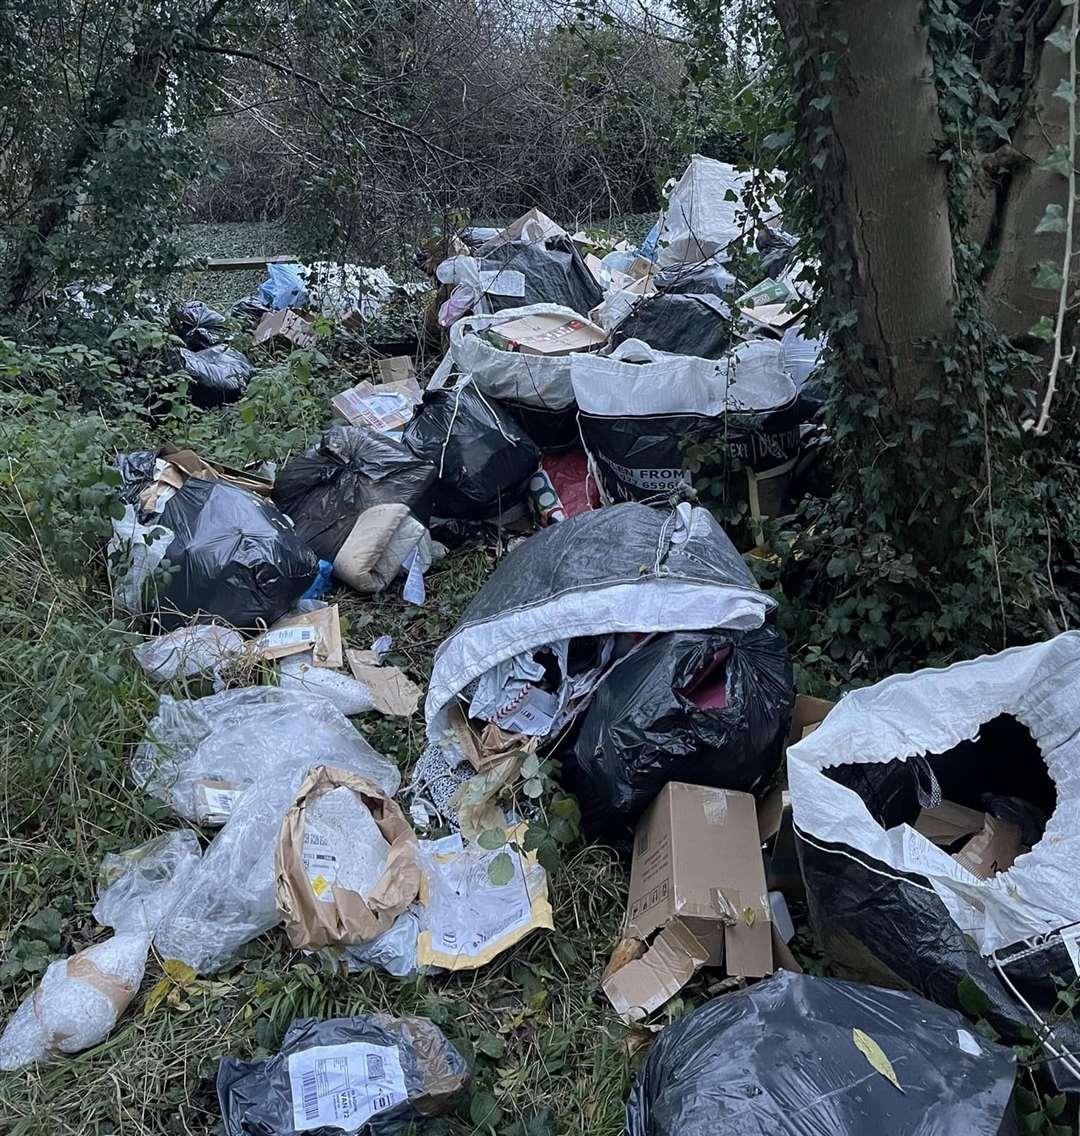 An investigation has been launched after several Hermes/Evri parcels were found dumped at the end of Beacon Lane, Chatham. Photo: Wayne Coveney